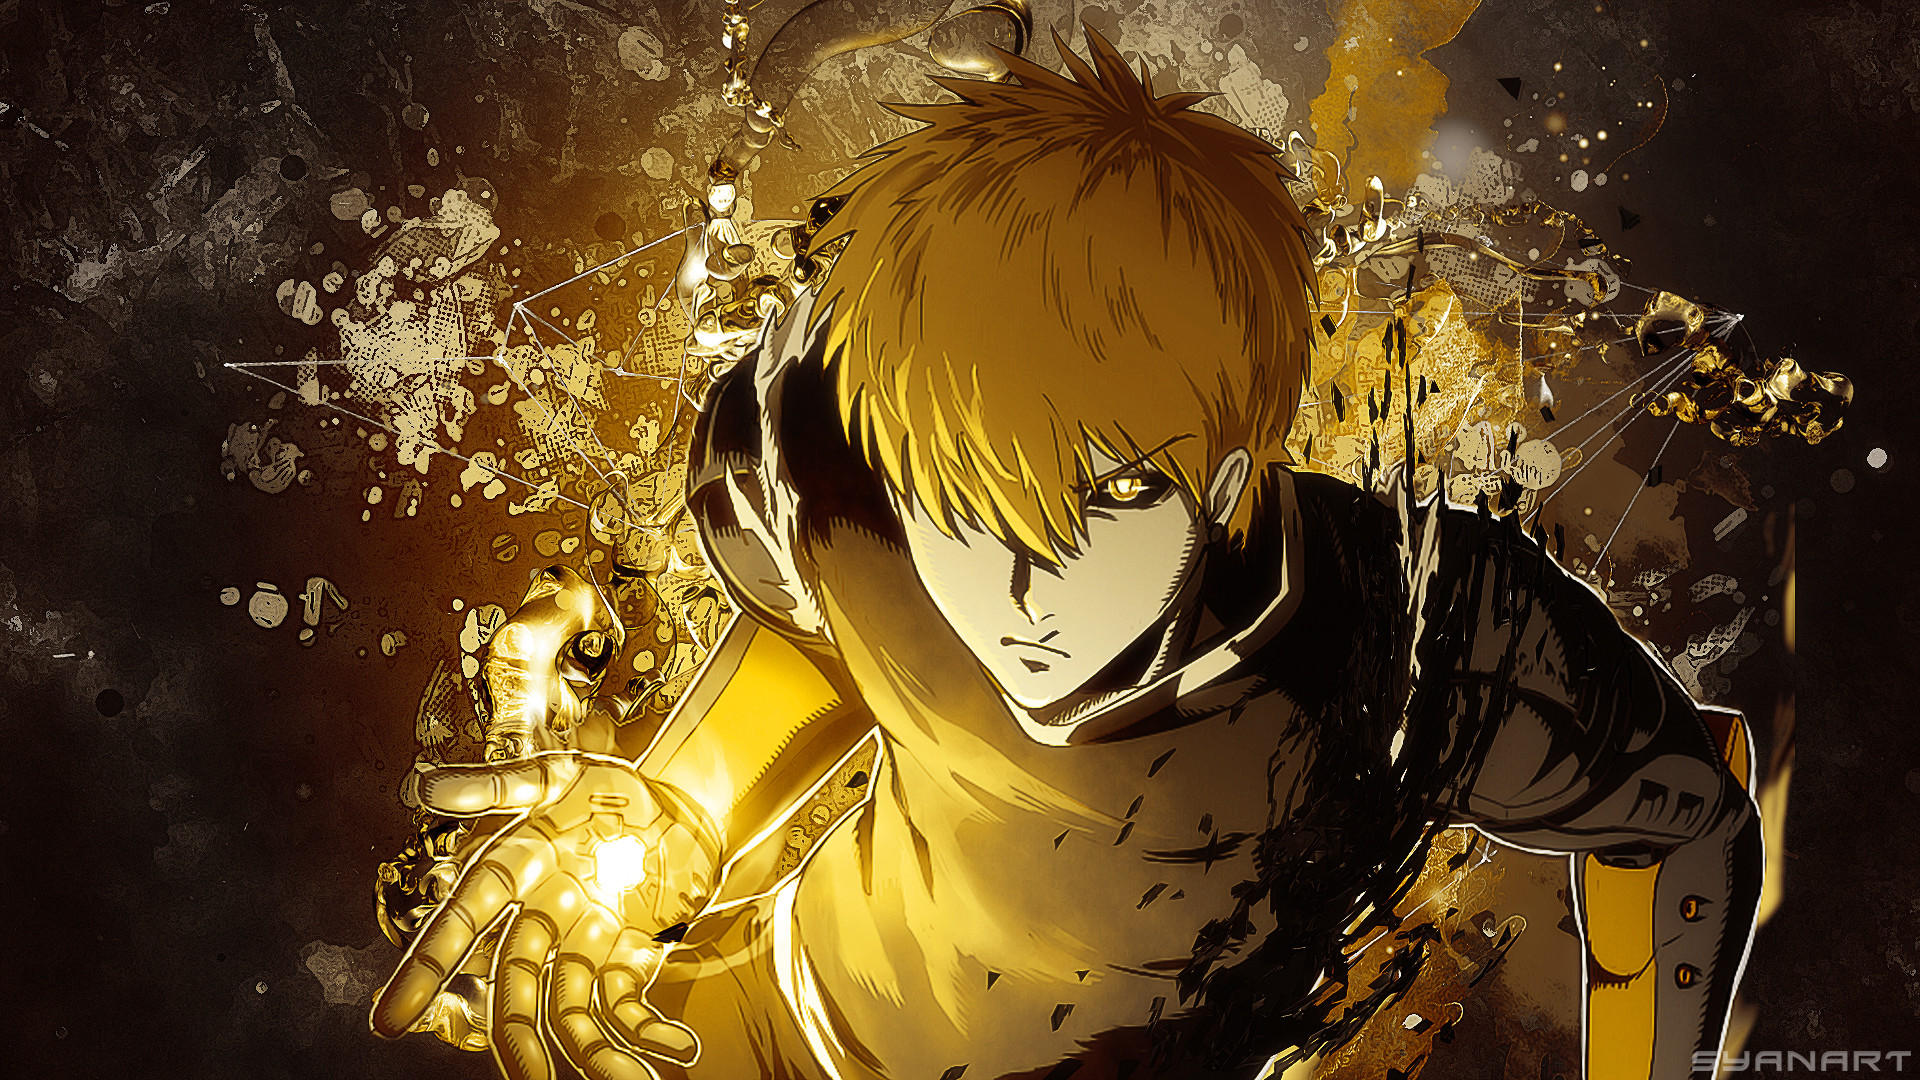 Post Views: 569. Categories: Anime. Tags: genos, one punch man wallpaper …